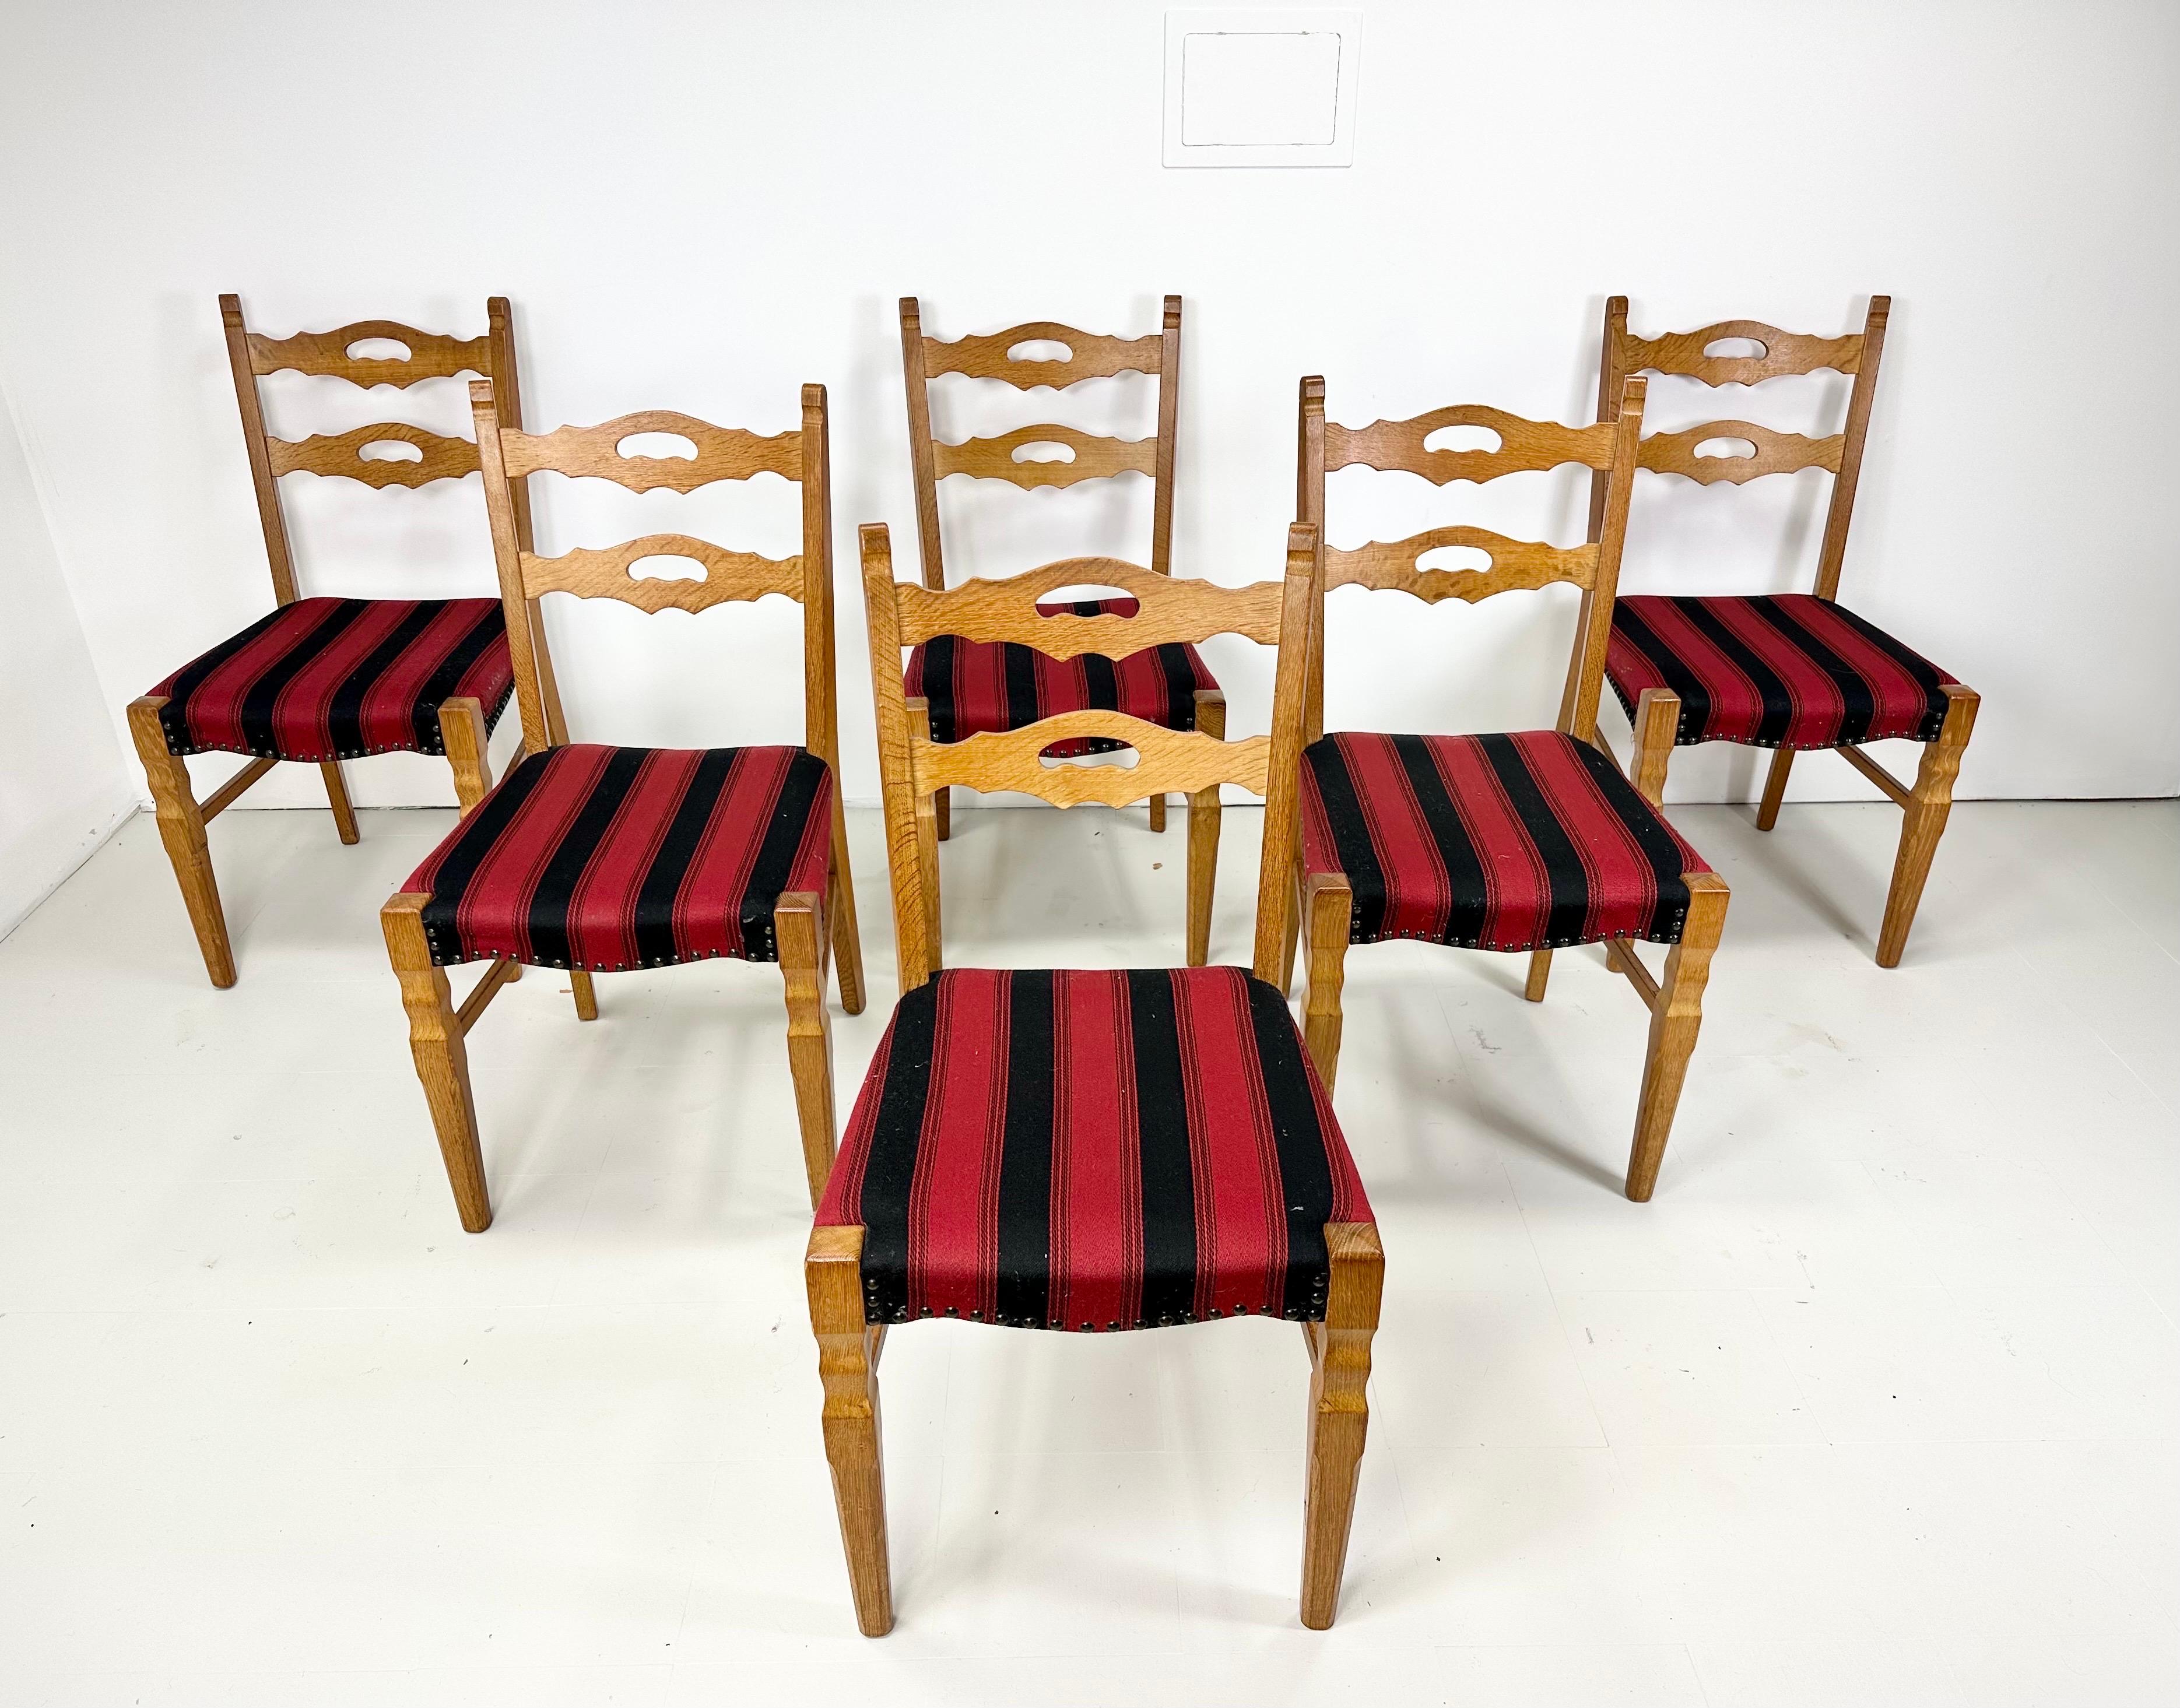 Set of 6 Dining Chairs designed by Henning Kjaernulf. Manufactured by EG Kvalitesmobel, Denmark, 1960’s. Chairs have a rustic warm finish and lines along with some classic mid century elements. Original upholstery and nailheads.